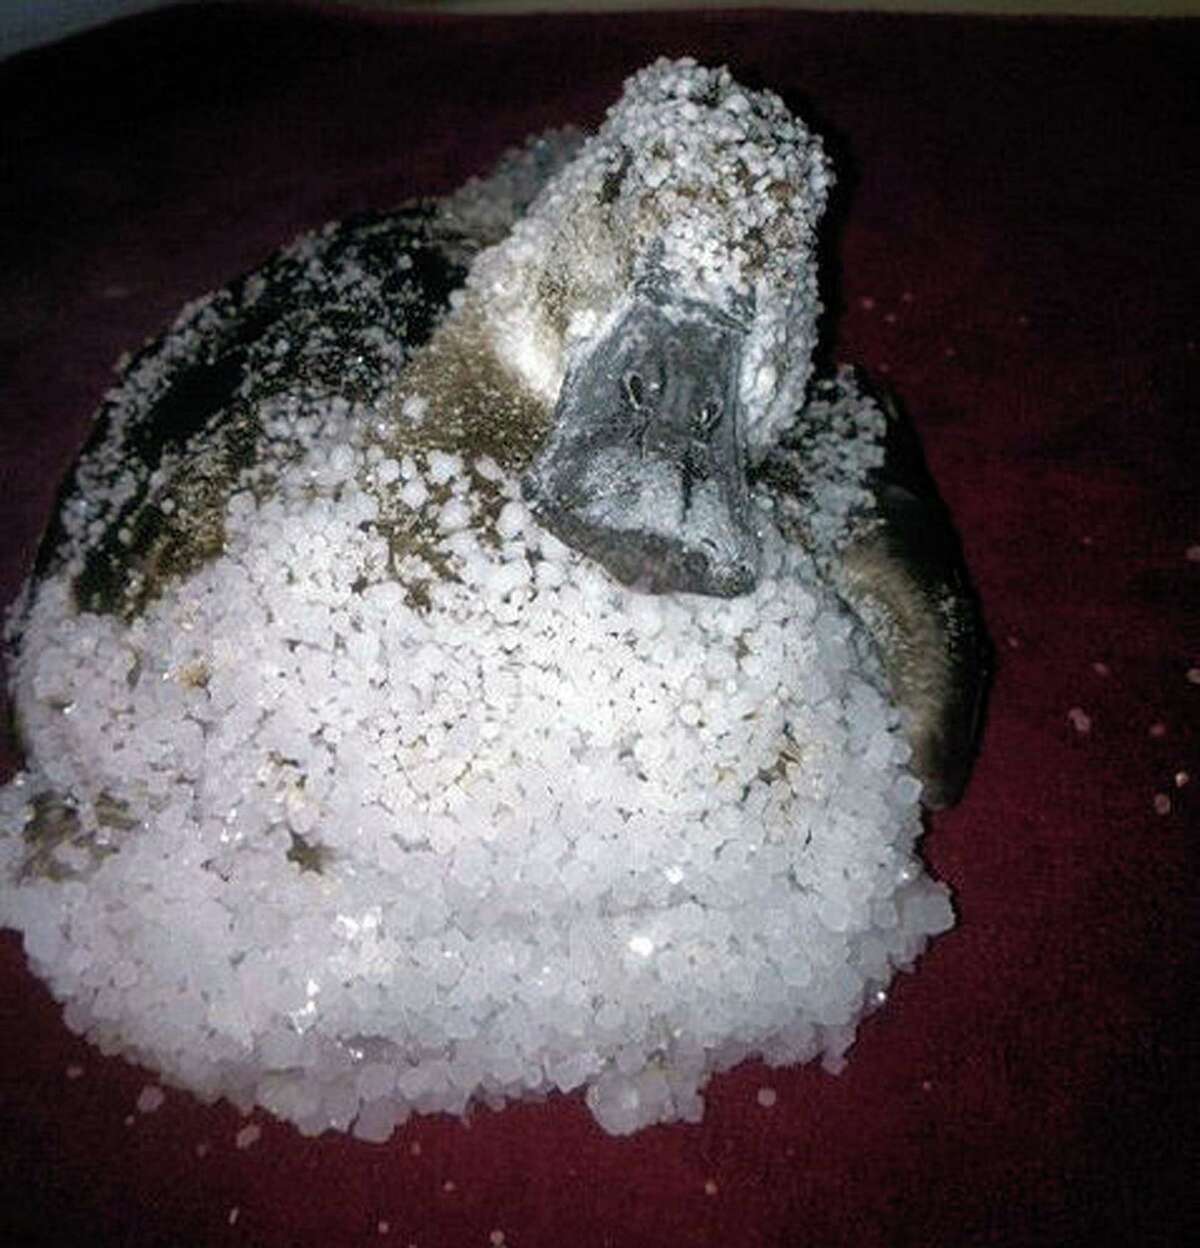 The statewide drought has put a strain on birds. Several hundred birds landed in a brine pit at the Phillips 66 refinery in Borger in the Texas Panhandle last fall. U.S. Fish and Wildlife is investigating. Seen above is a salt-encrusted northern shoveler found in the pit.